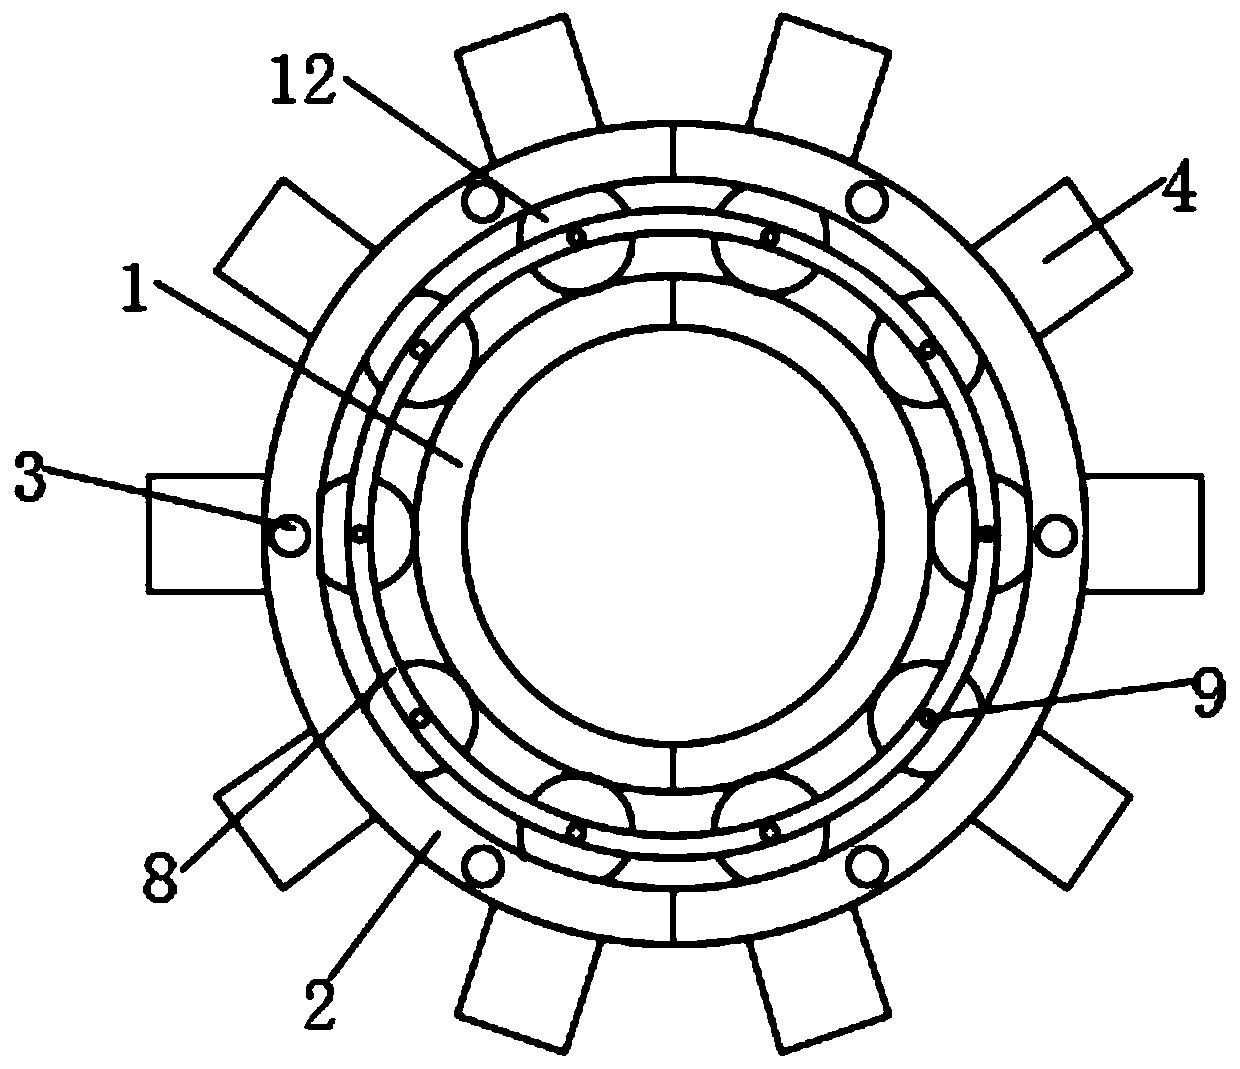 Powder metallurgy bearing for supporting motor rotor in a motor